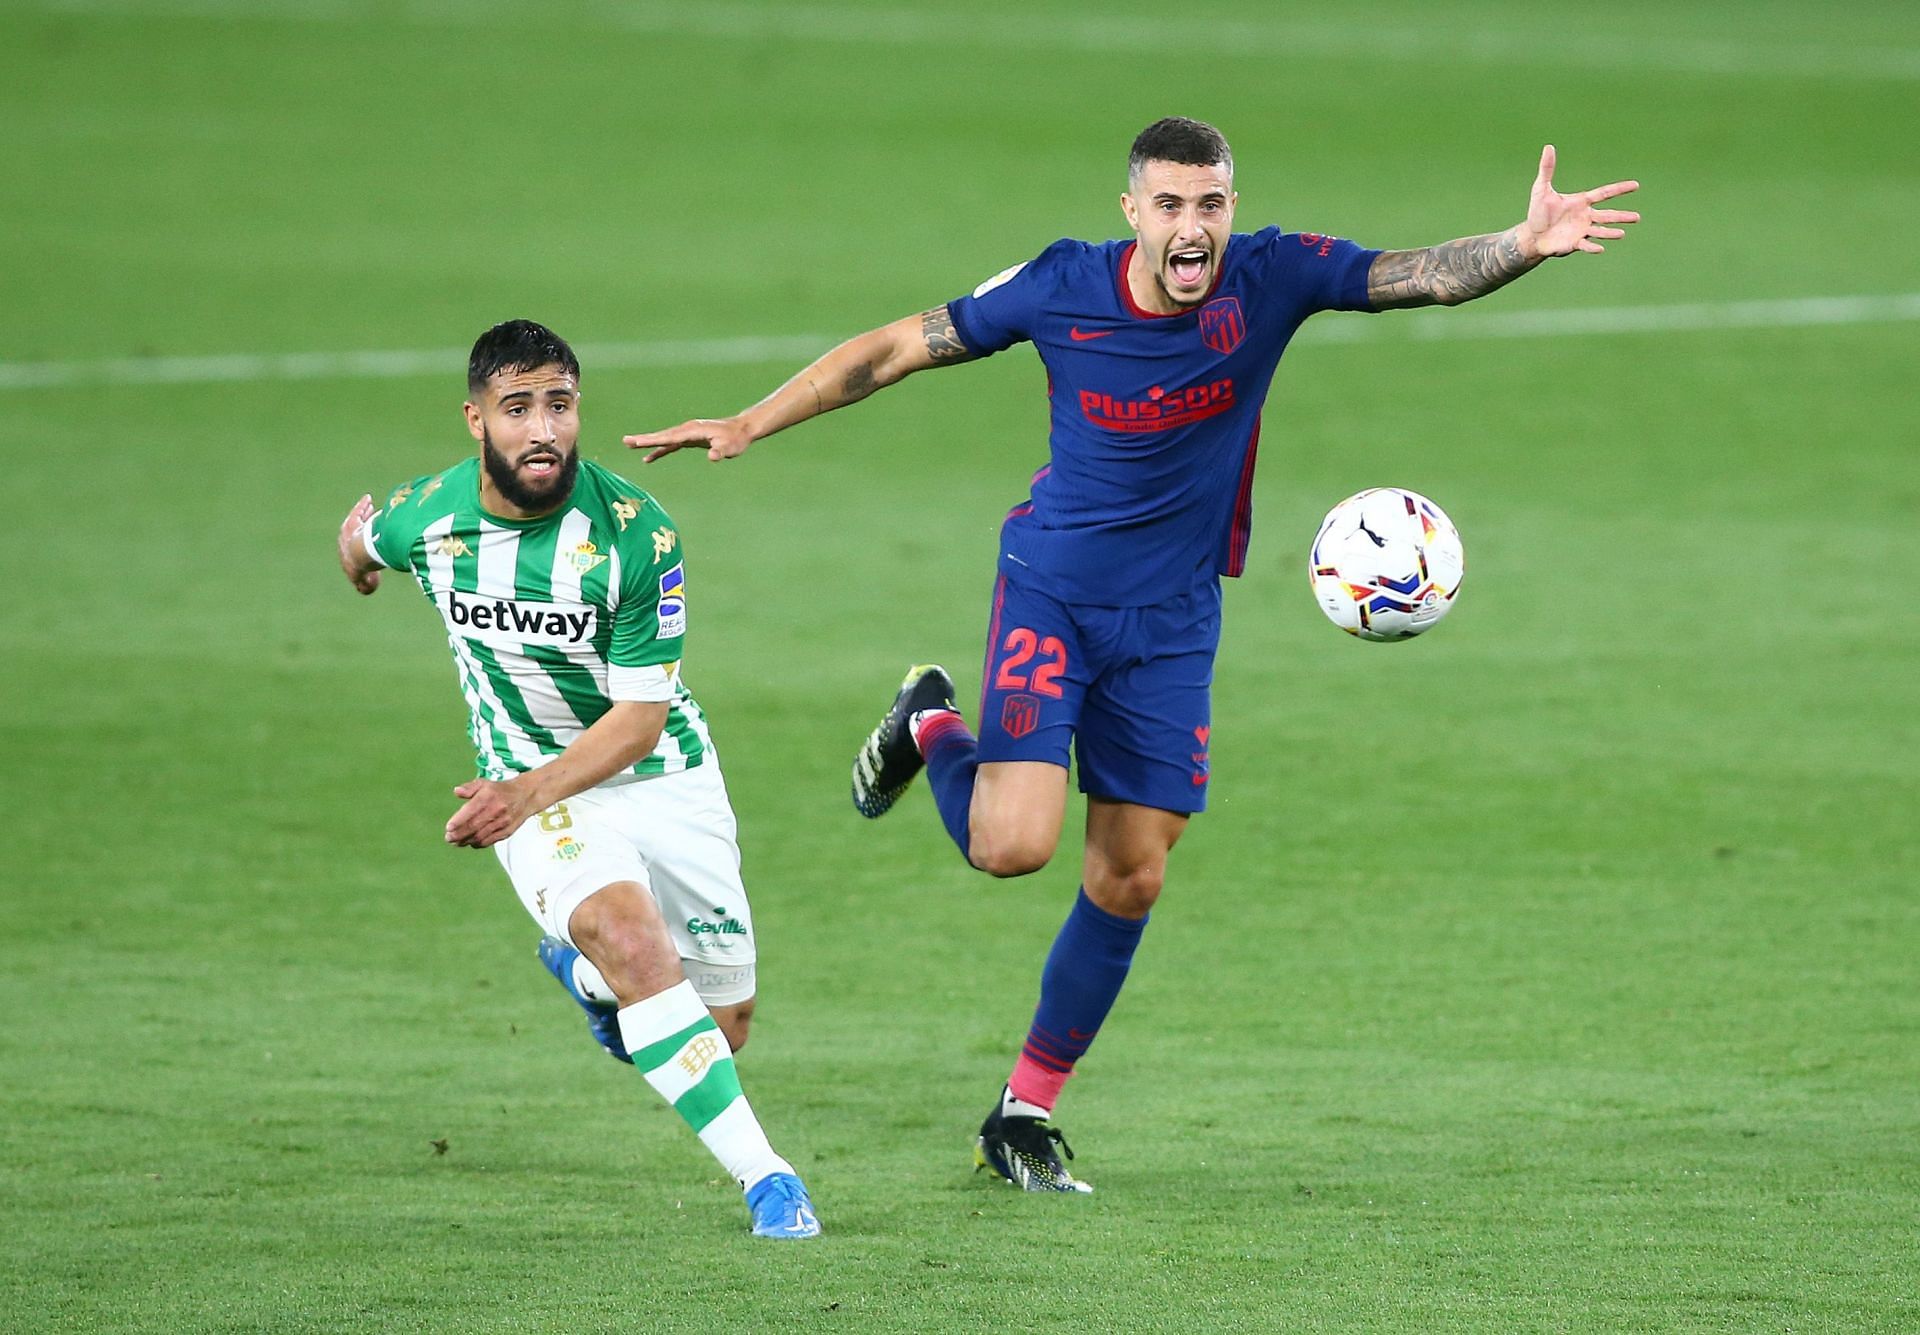 Real Betis take on Atletico Madrid this weekend